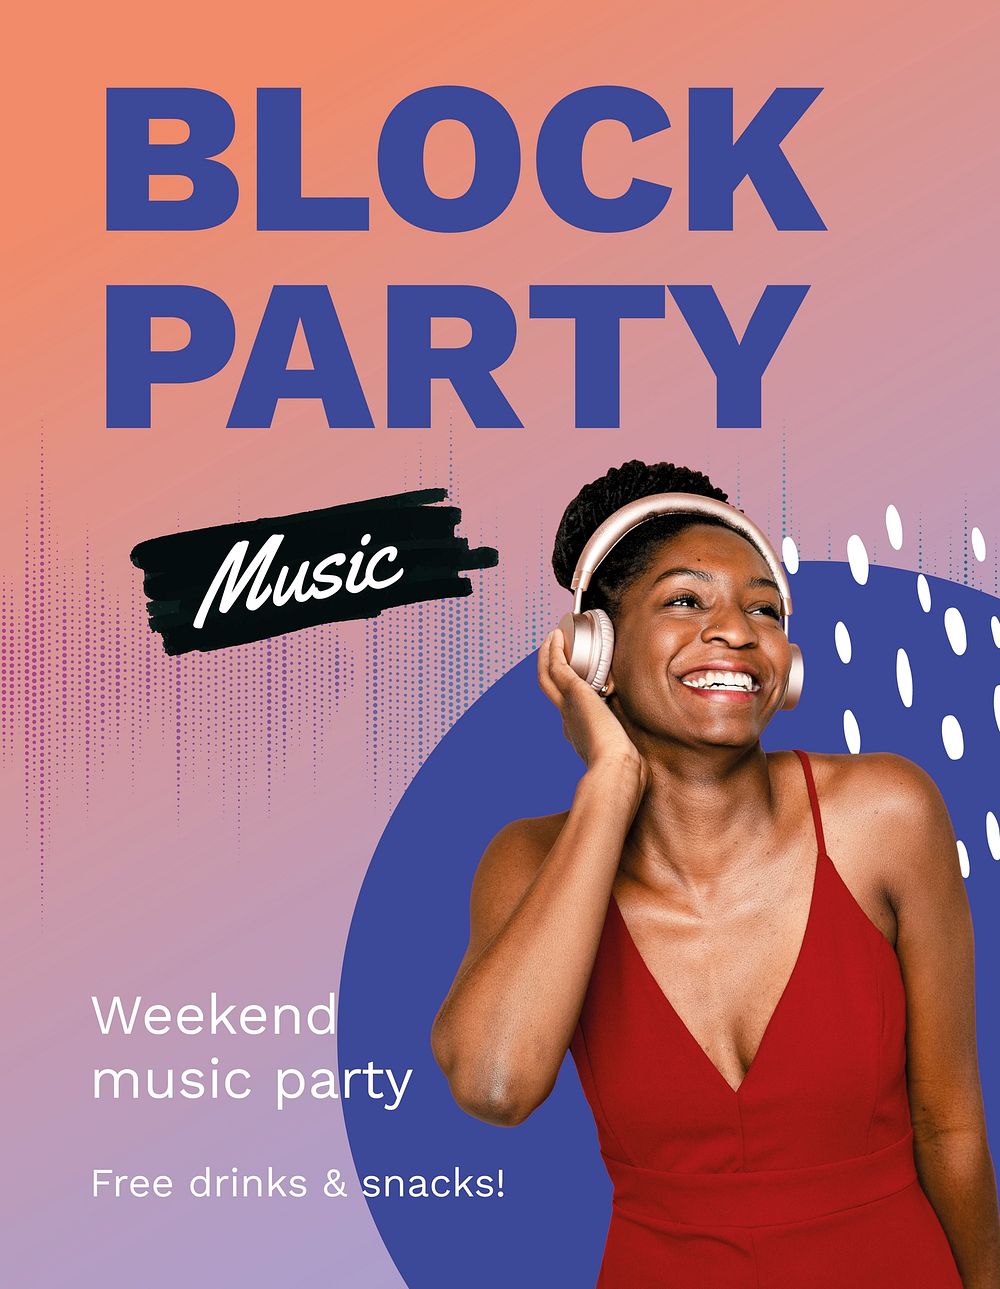 Music party flyer template, African American woman photo vector